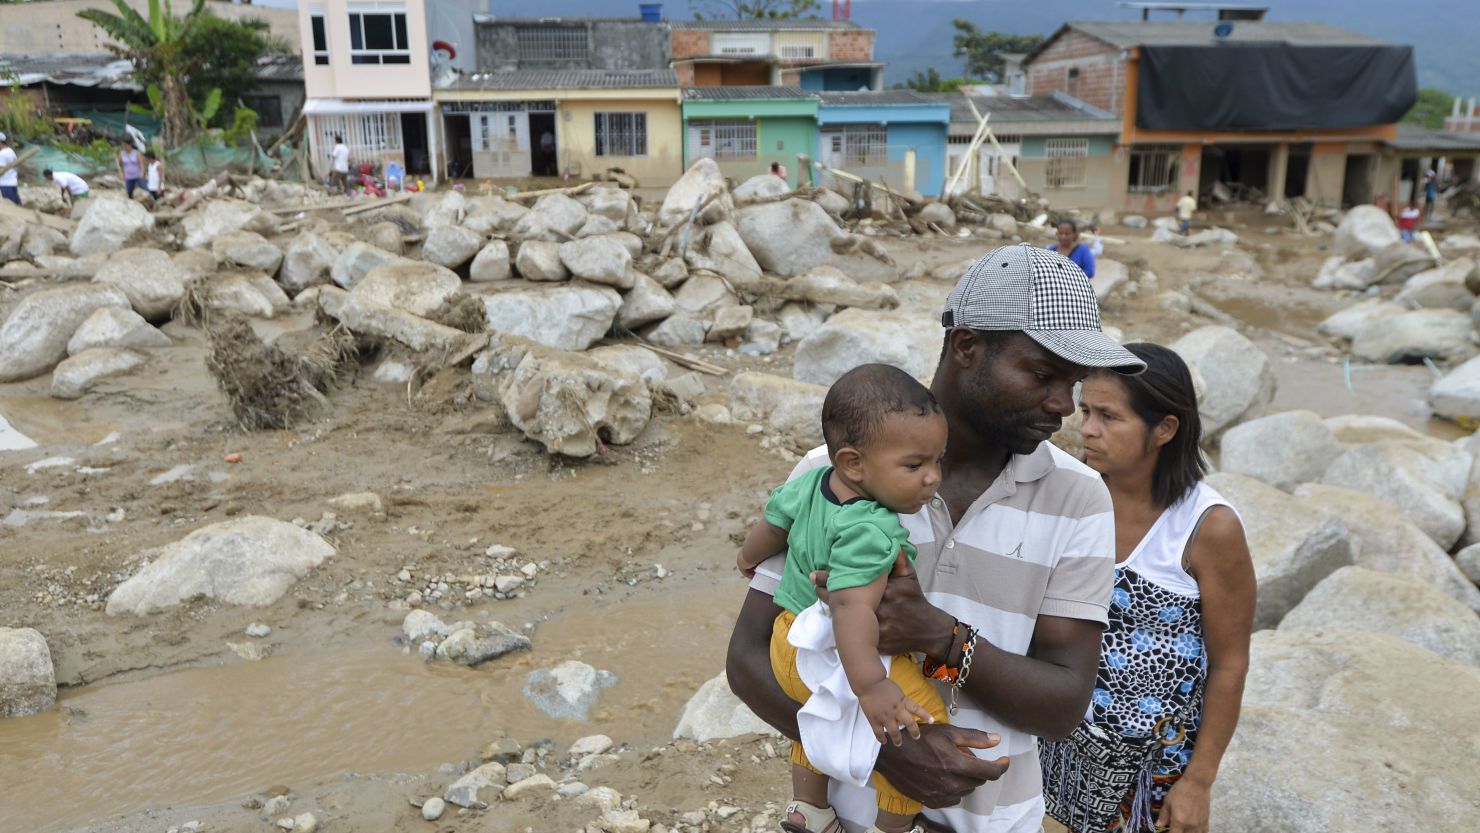 Residents survey damage caused by mudslides, flooding in Mocoa, Colombia.